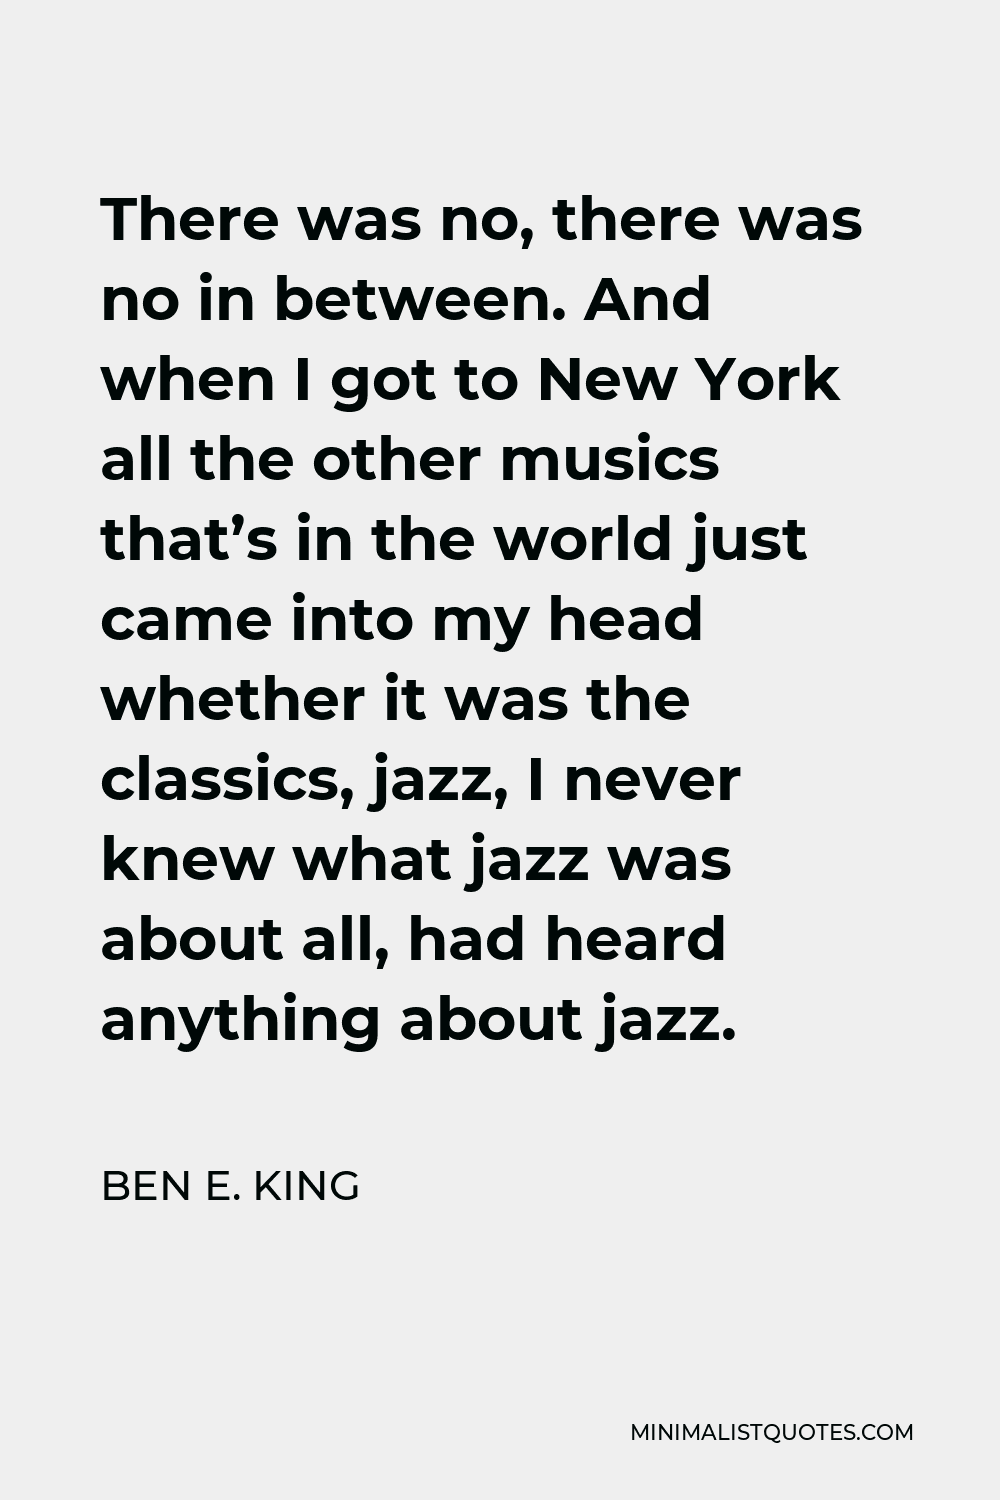 Ben E. King Quote - There was no, there was no in between. And when I got to New York all the other musics that’s in the world just came into my head whether it was the classics, jazz, I never knew what jazz was about all, had heard anything about jazz.